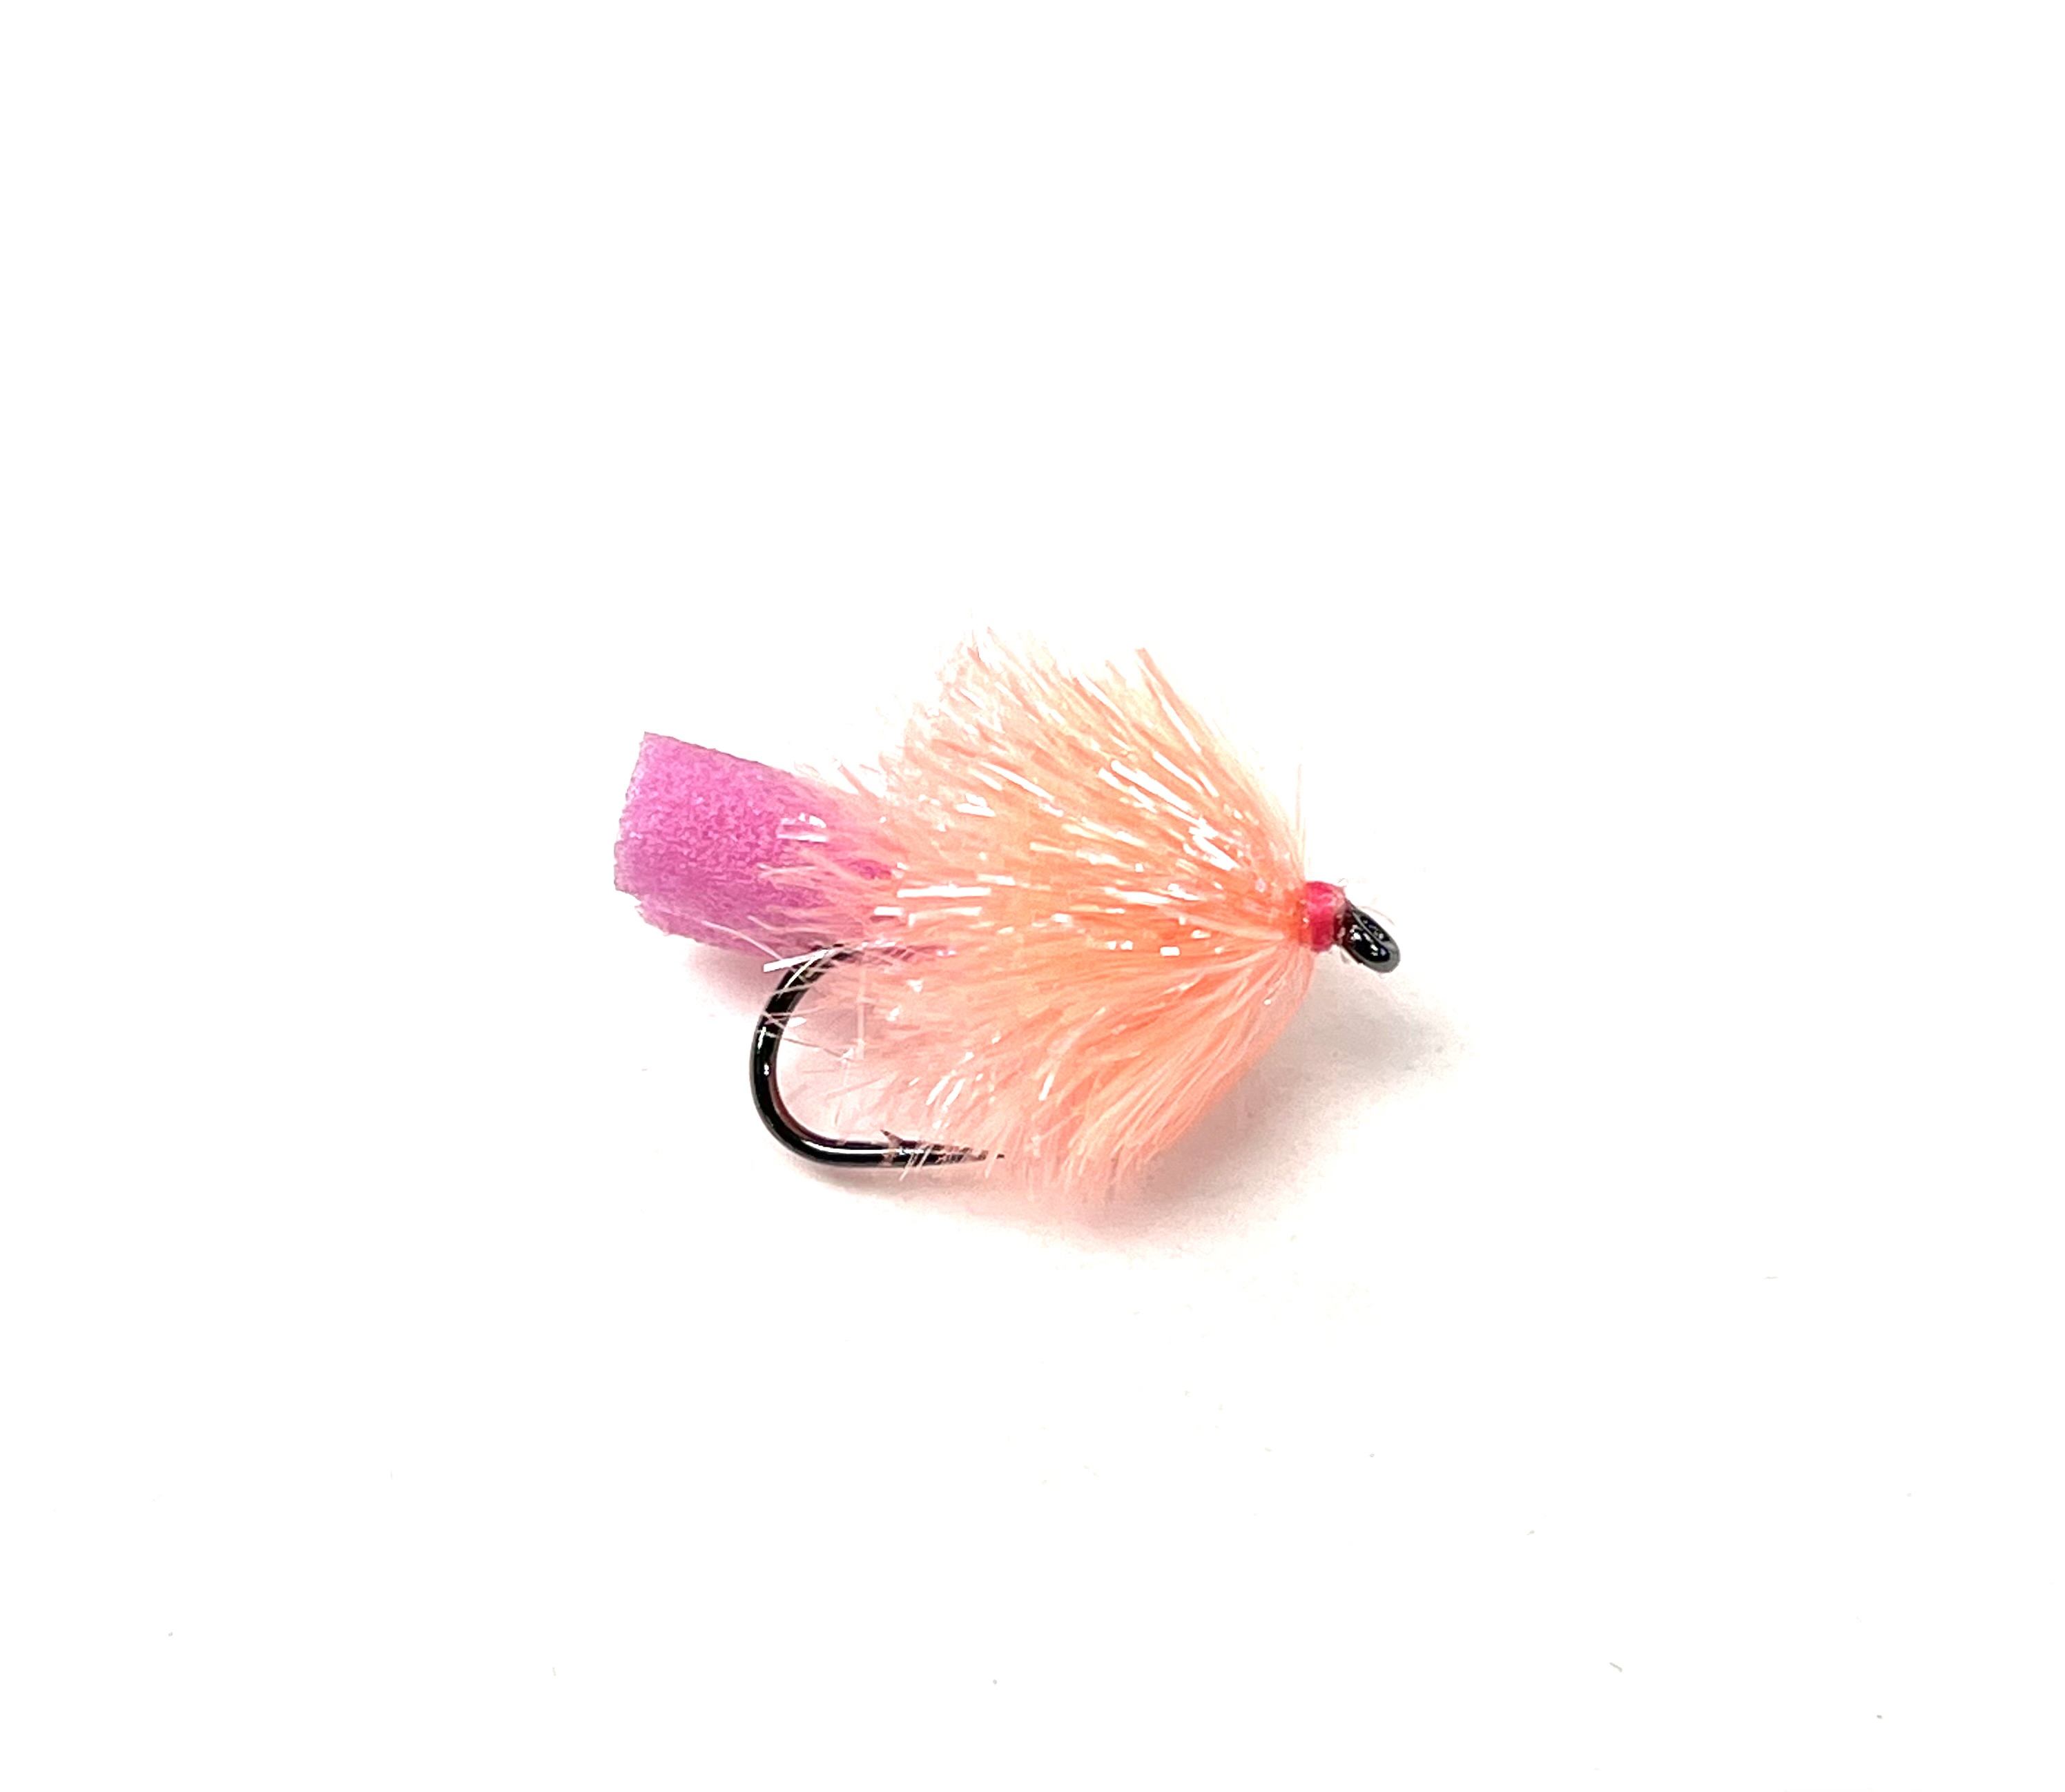 MFC Rowley's FAB - Prawn/Biscuit - Size 8